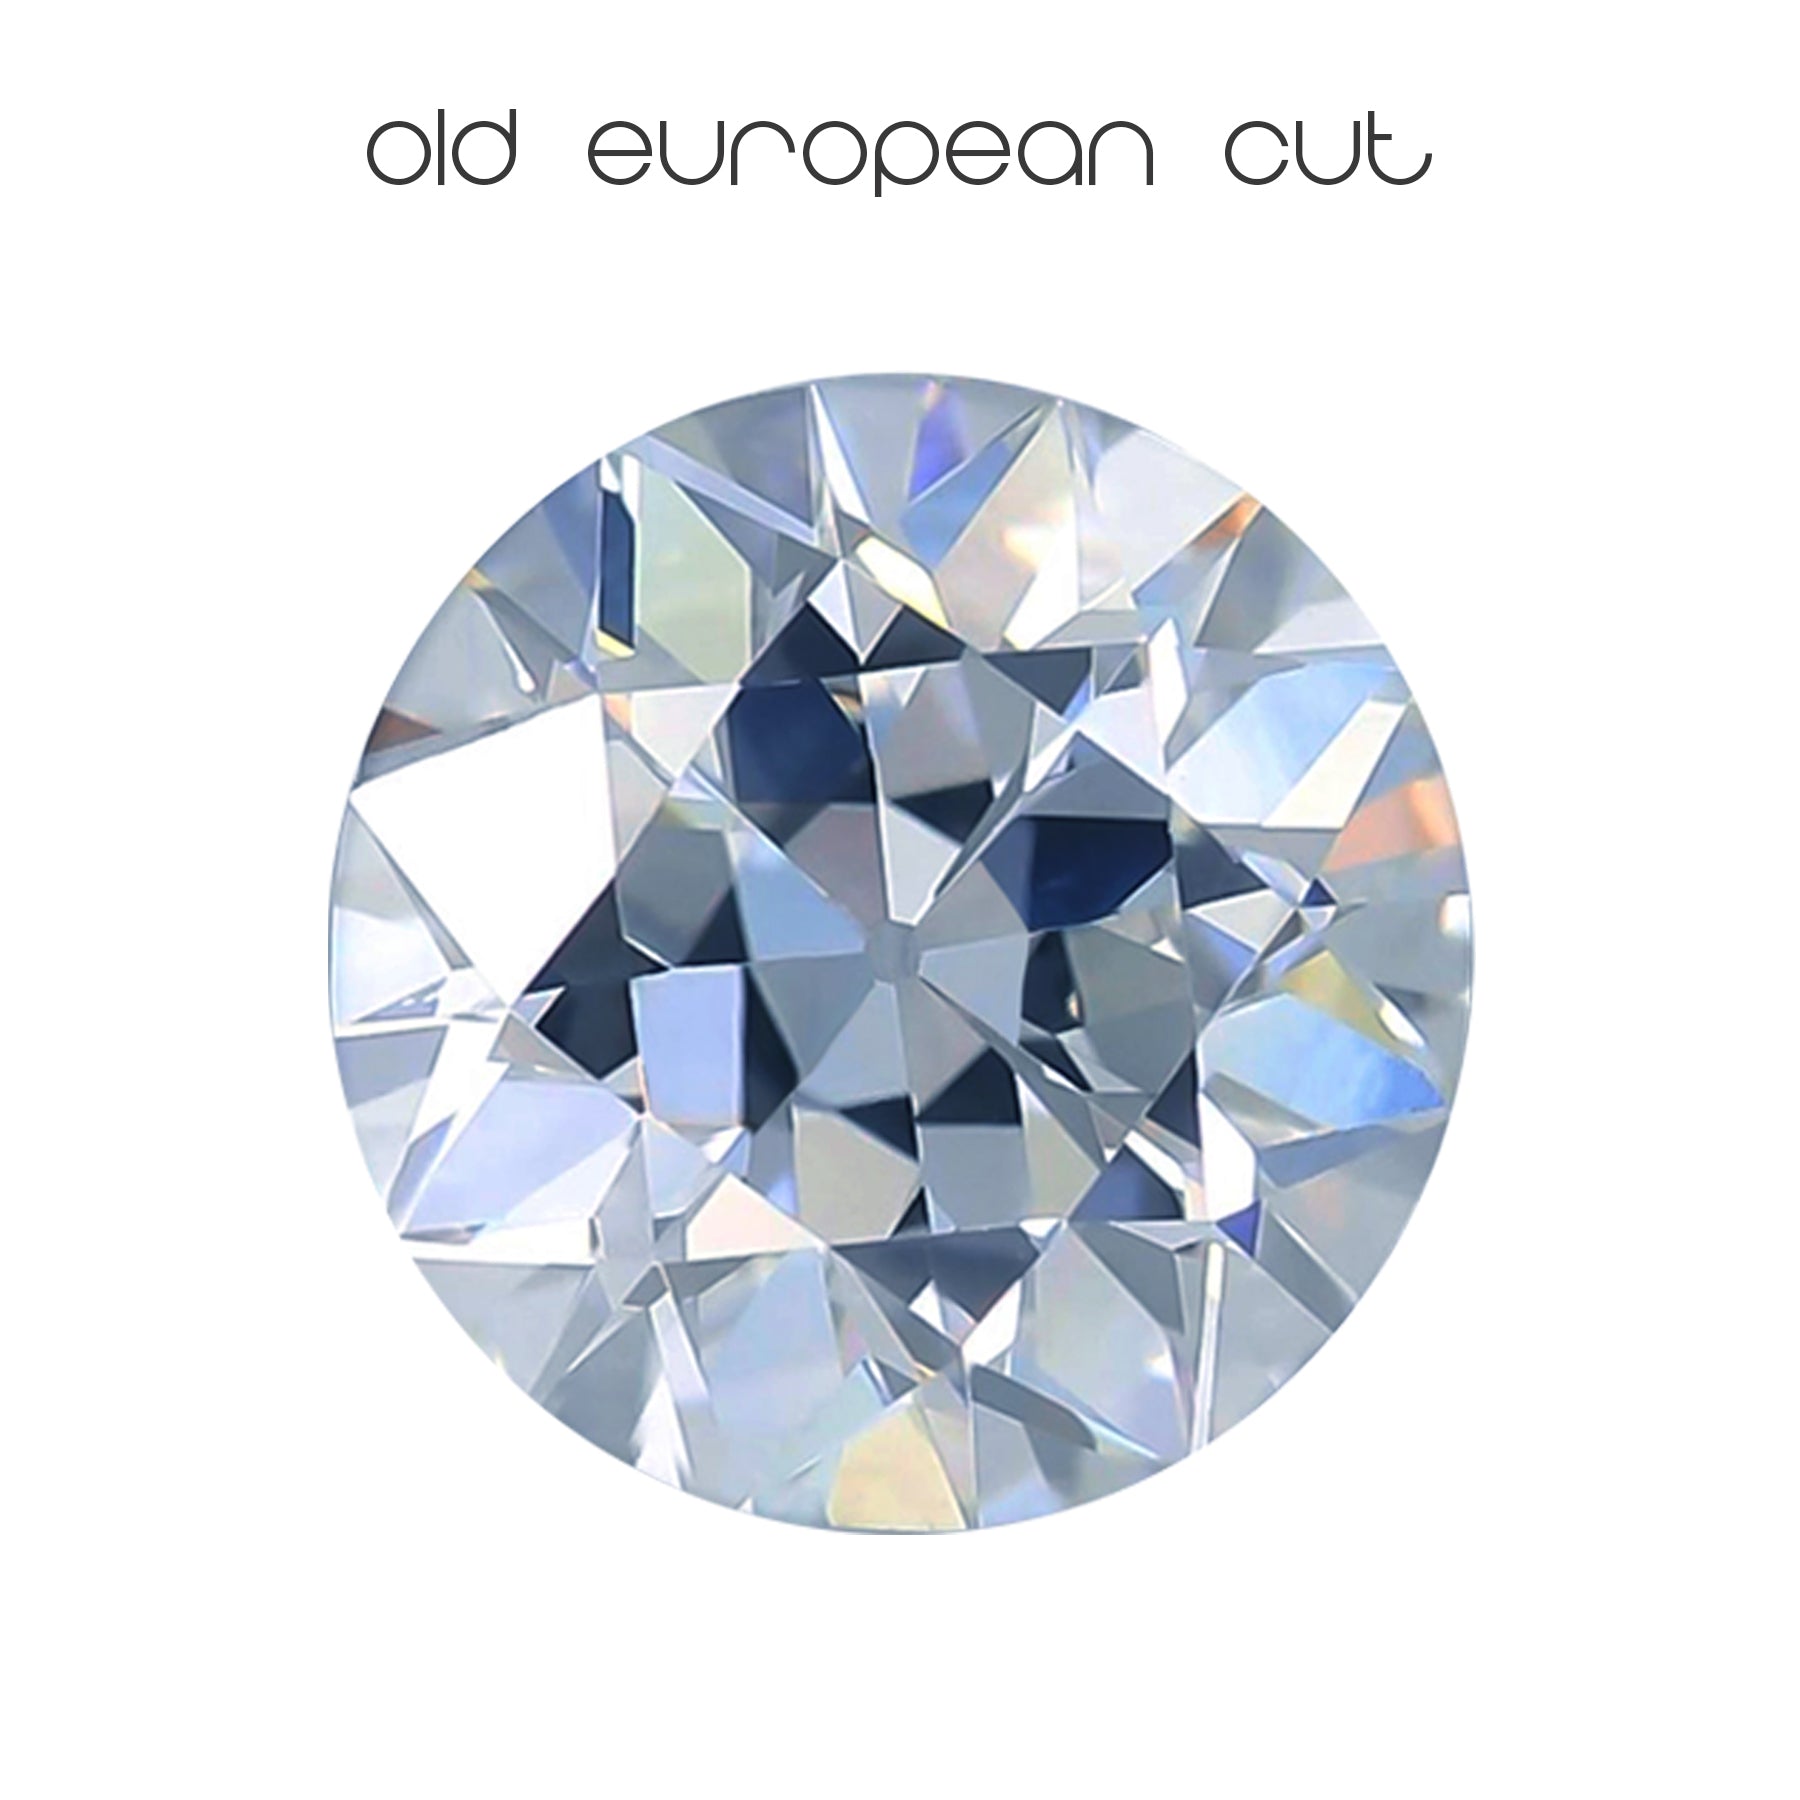 the history and meaning of the old european cut